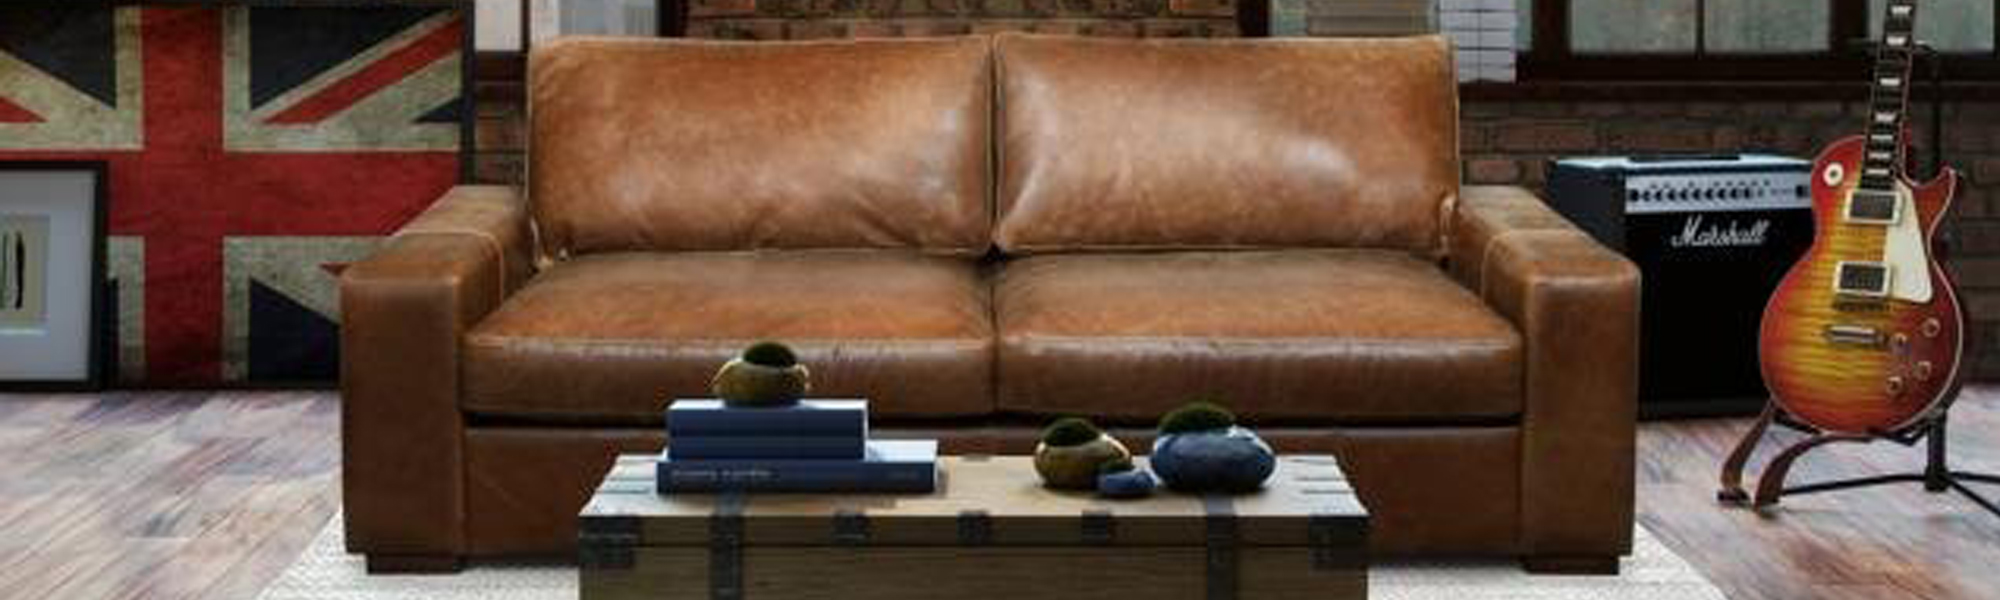 Large 4 Seater Leather Sofas